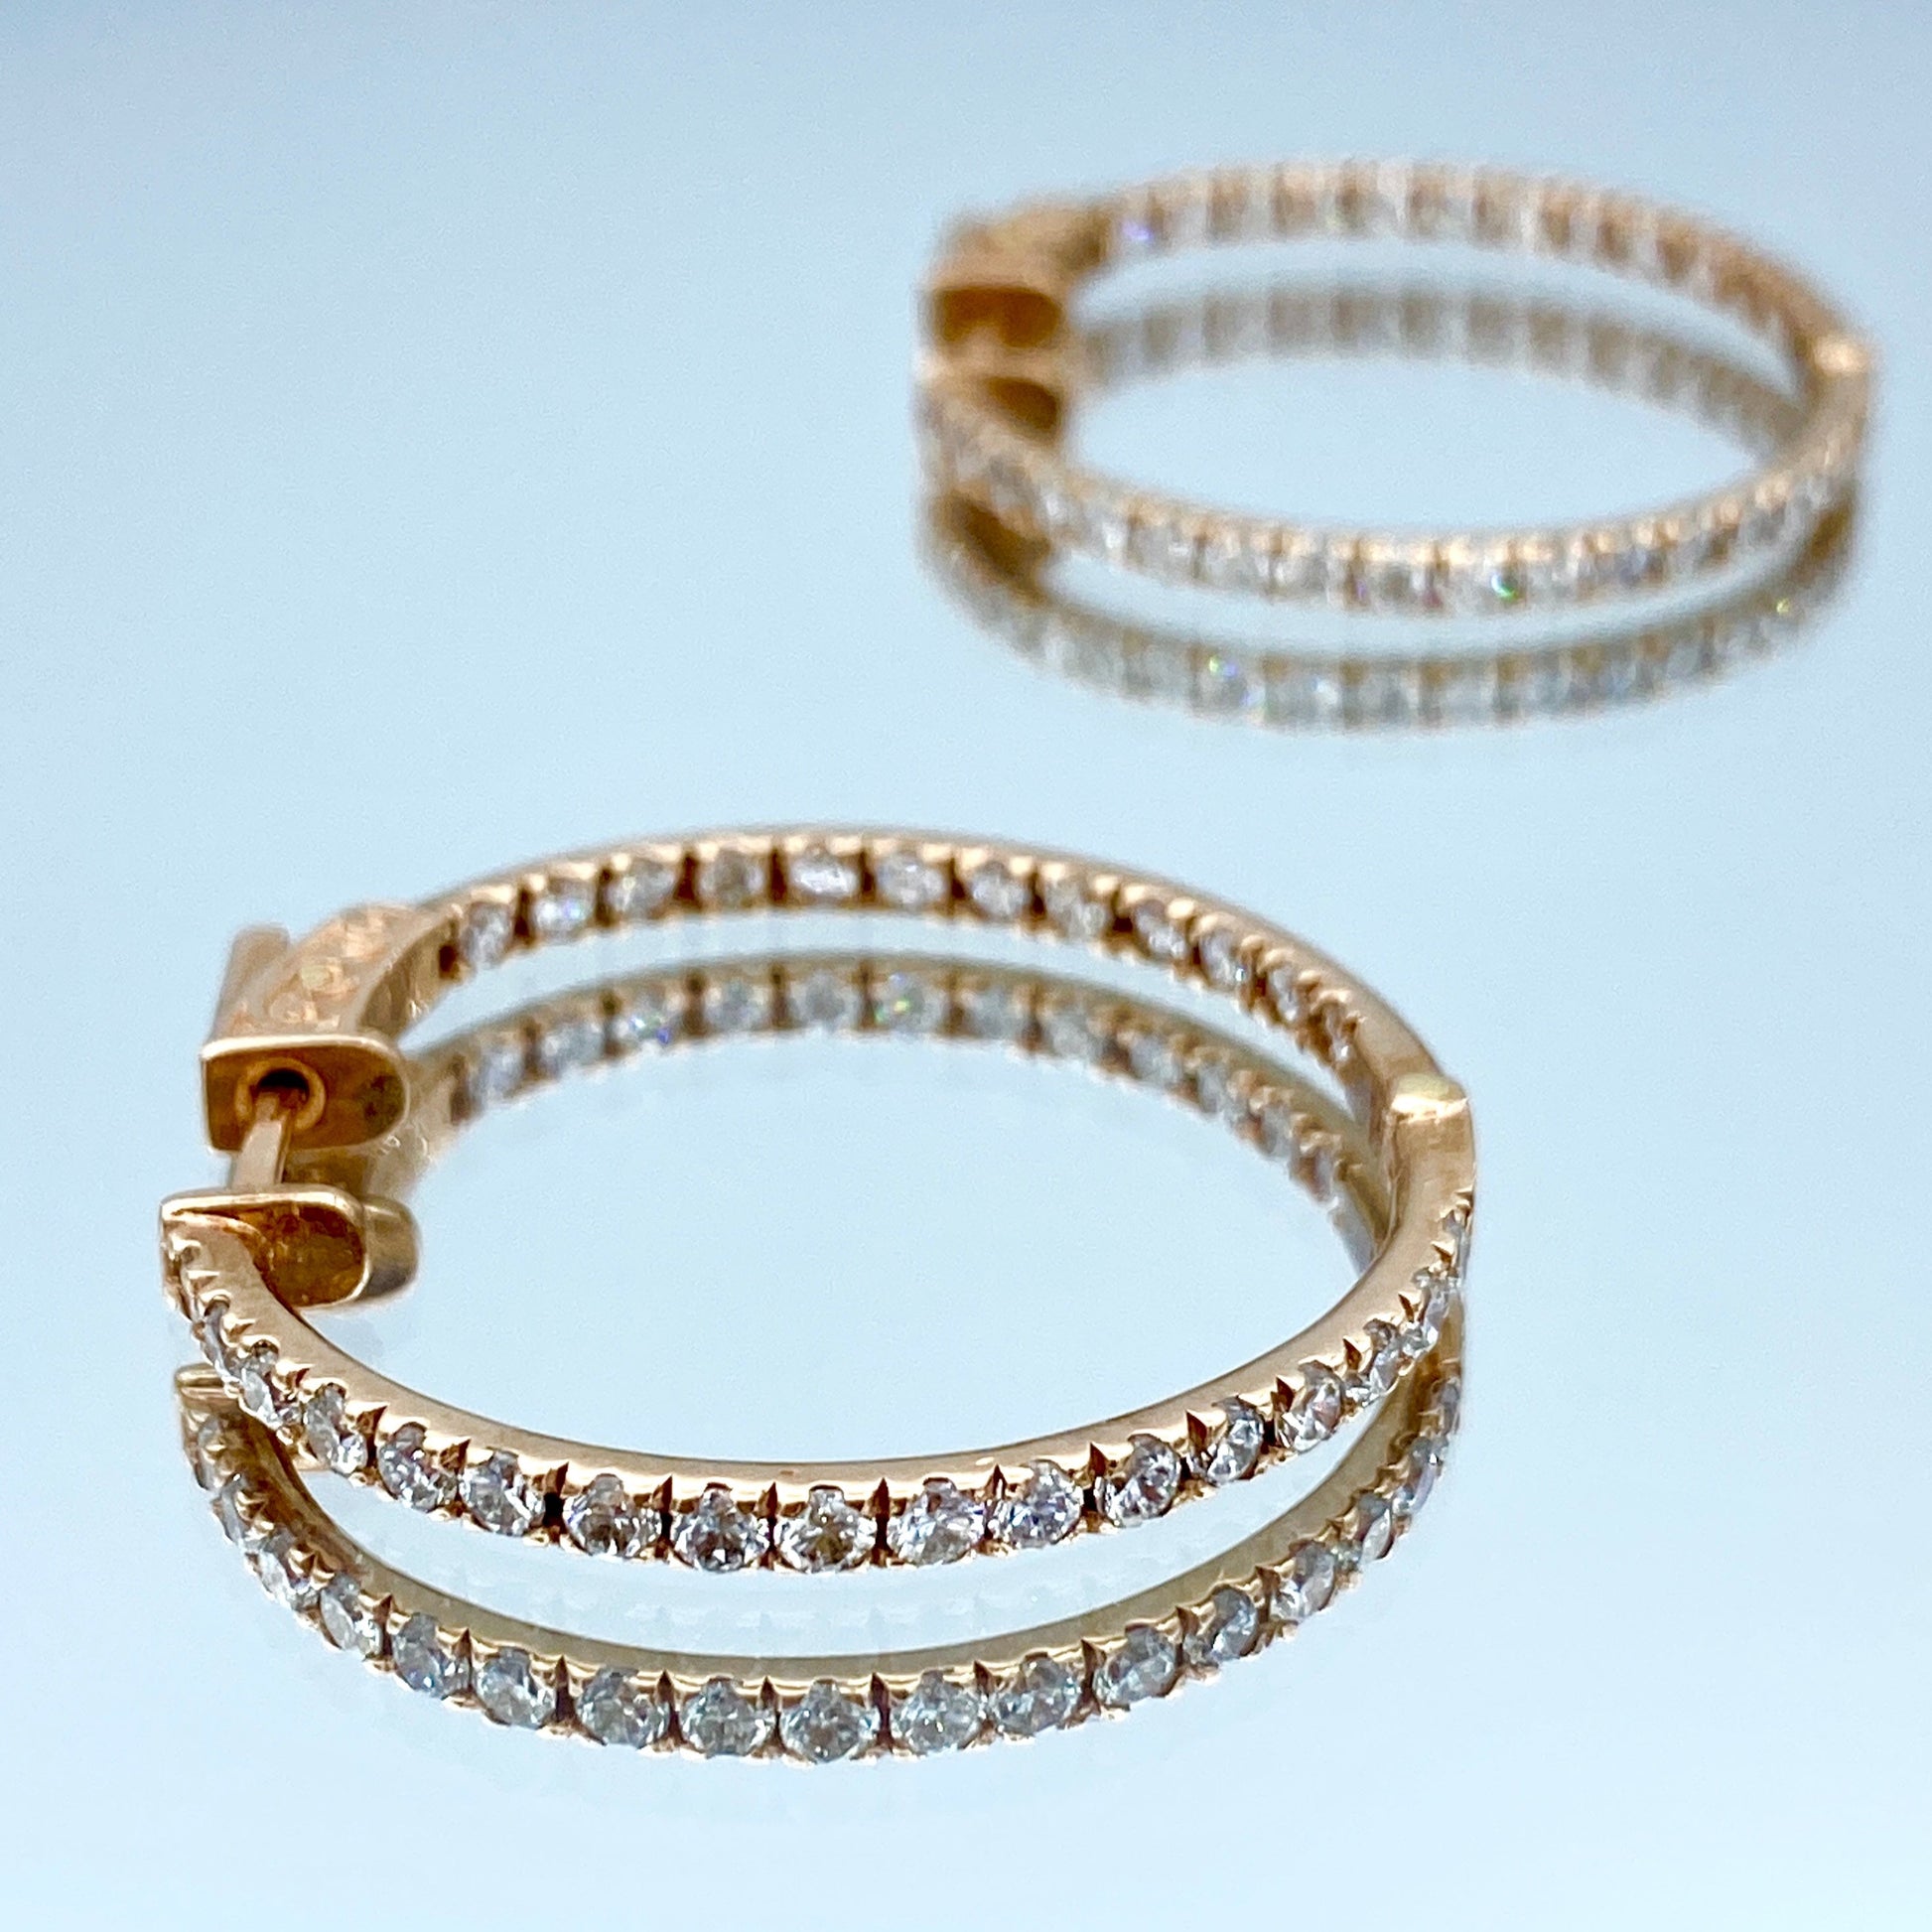 Inside-Out Diamond Hoop Earrings in 14K Rose Gold - L and L Jewelry